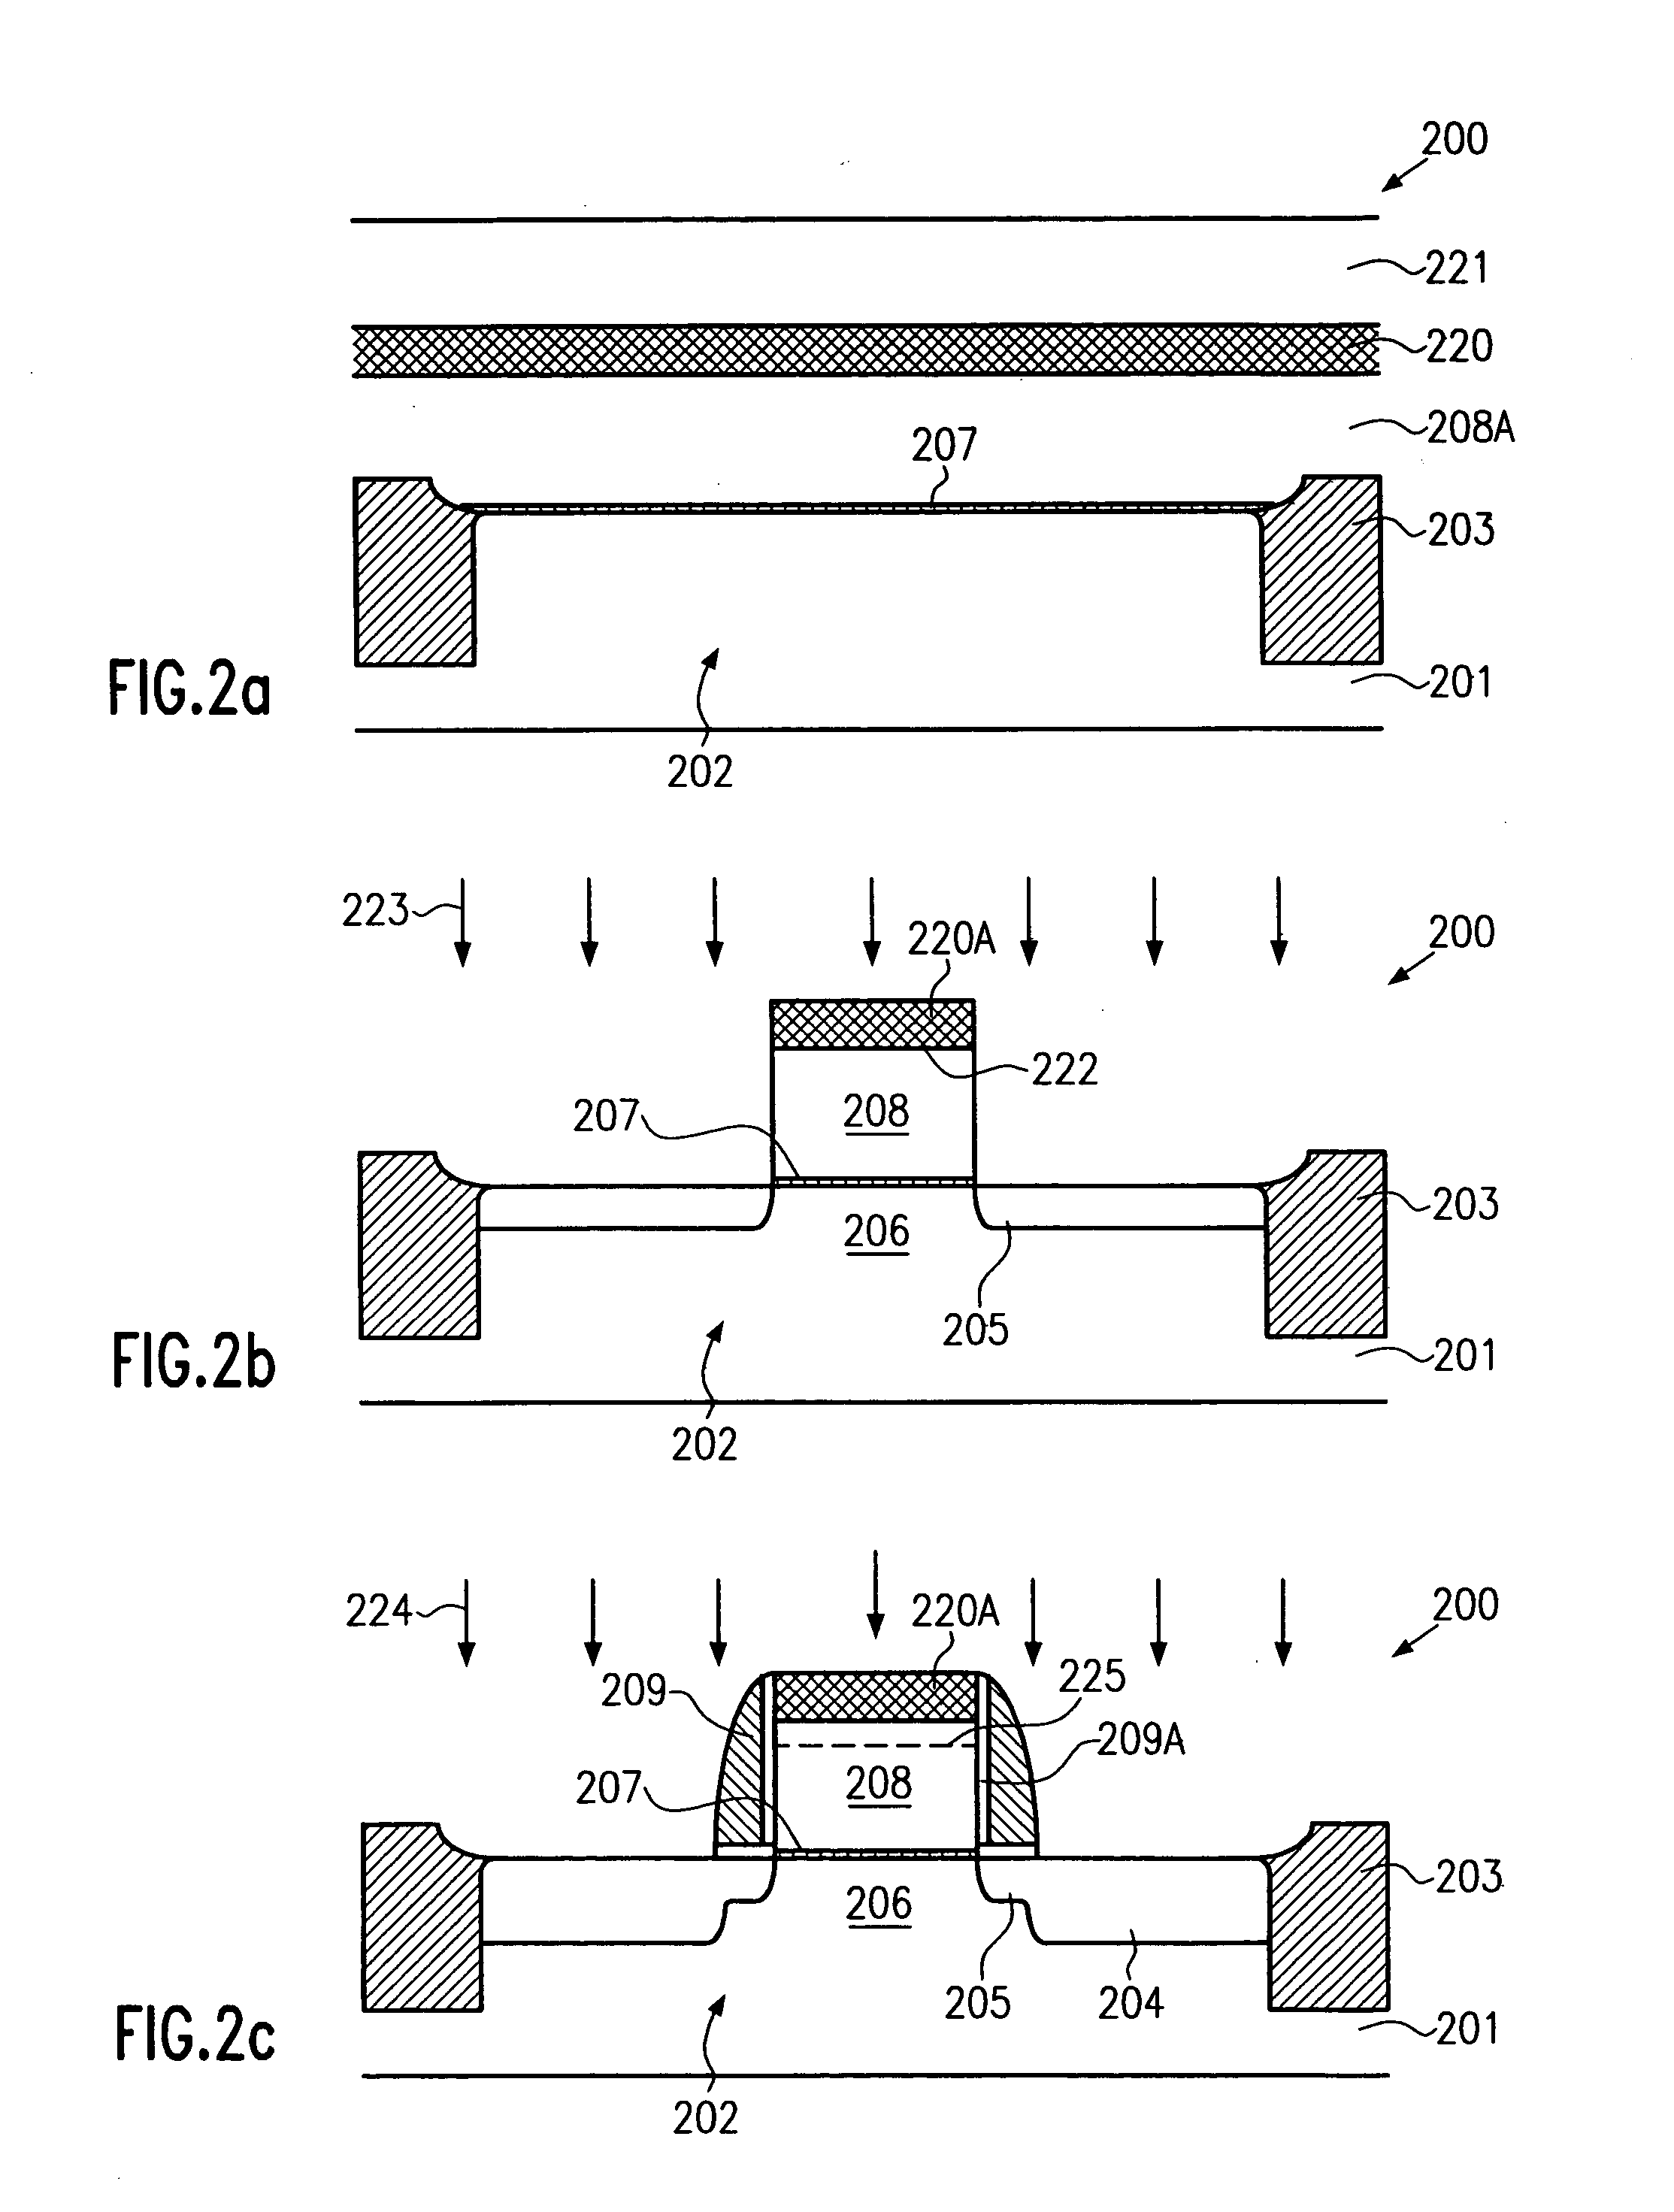 Polysilicon line having a metal silicide region enabling linewidth scaling